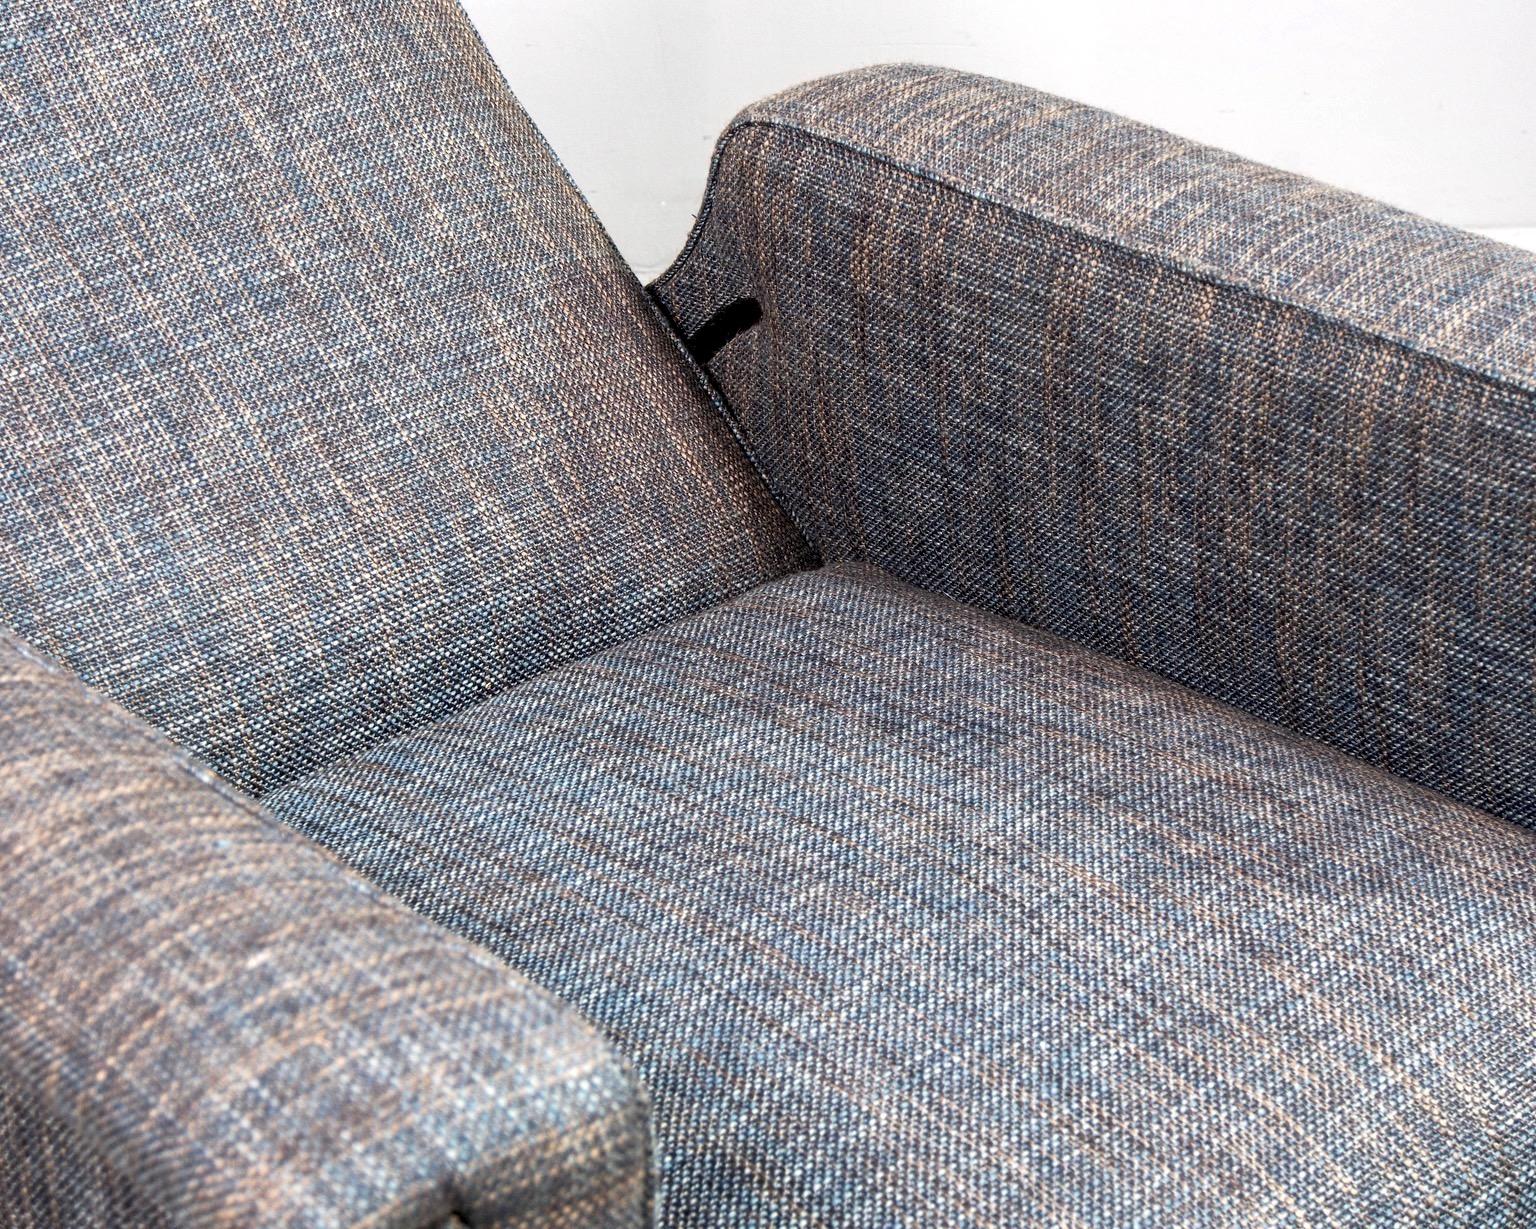 Pair of Italian Midcentury Lounge Chairs with New Tweed Upholstery 2